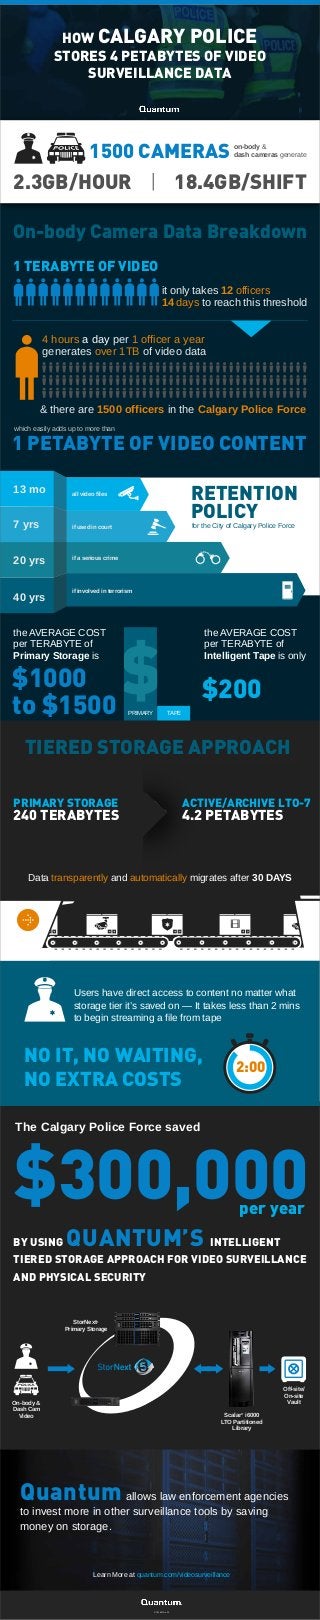 1500 CAMERAS on-body &
dash cameras generate
the AVERAGE COST
per TERABYTE of
Primary Storage is
2.3GB/HOUR | 18.4GB/SHIFT
1 PETABYTE OF VIDEO CONTENT
On-body Camera Data Breakdown
the AVERAGE COST
per TERABYTE of
Intelligent Tape is only
$200
240 TERABYTES
PRIMARY STORAGE
4.2 PETABYTES
ACTIVE/ARCHIVE LTO-7
Data transparently and automatically migrates after 30 DAYS
1 TERABYTE OF VIDEO
BY USING QUANTUM’S INTELLIGENT
TIERED STORAGE APPROACH FOR VIDEO SURVEILLANCE
AND PHYSICAL SECURITY
$300,000
4 hours a day per 1 officer a year
generates over 1TB of video data
for the City of Calgary Police Force
which easily adds up to more than
it only takes 12 officers
14 days to reach this threshold
& there are 1500 officers in the Calgary Police Force
The Calgary Police Force saved
RETENTION
POLICY
all video files
if used in court
if a serious crime
if involved in terrorism
On-body &
Dash Cam
Video Scalar®
i6000
LTO Partitioned
Library
StorNext®
Primary Storage
Off-site/
On-site
Vault
13 mo
7 yrs
20 yrs
40 yrs
PRIMARY TAPE
$
HOW CALGARY POLICE
STORES 4 PETABYTES OF VIDEO
SURVEILLANCE DATA
TIERED STORAGE APPROACH
Users have direct access to content no matter what
storage tier it’s saved on — It takes less than 2 mins
to begin streaming a file from tape
NO IT, NO WAITING,
NO EXTRA COSTS
2:00
Quantum allows law enforcement agencies
to invest more in other surveillance tools by saving
money on storage.
Learn More at quantum.com/videosurveillance
ST01687A-v03
$1000
to $1500
per year
 